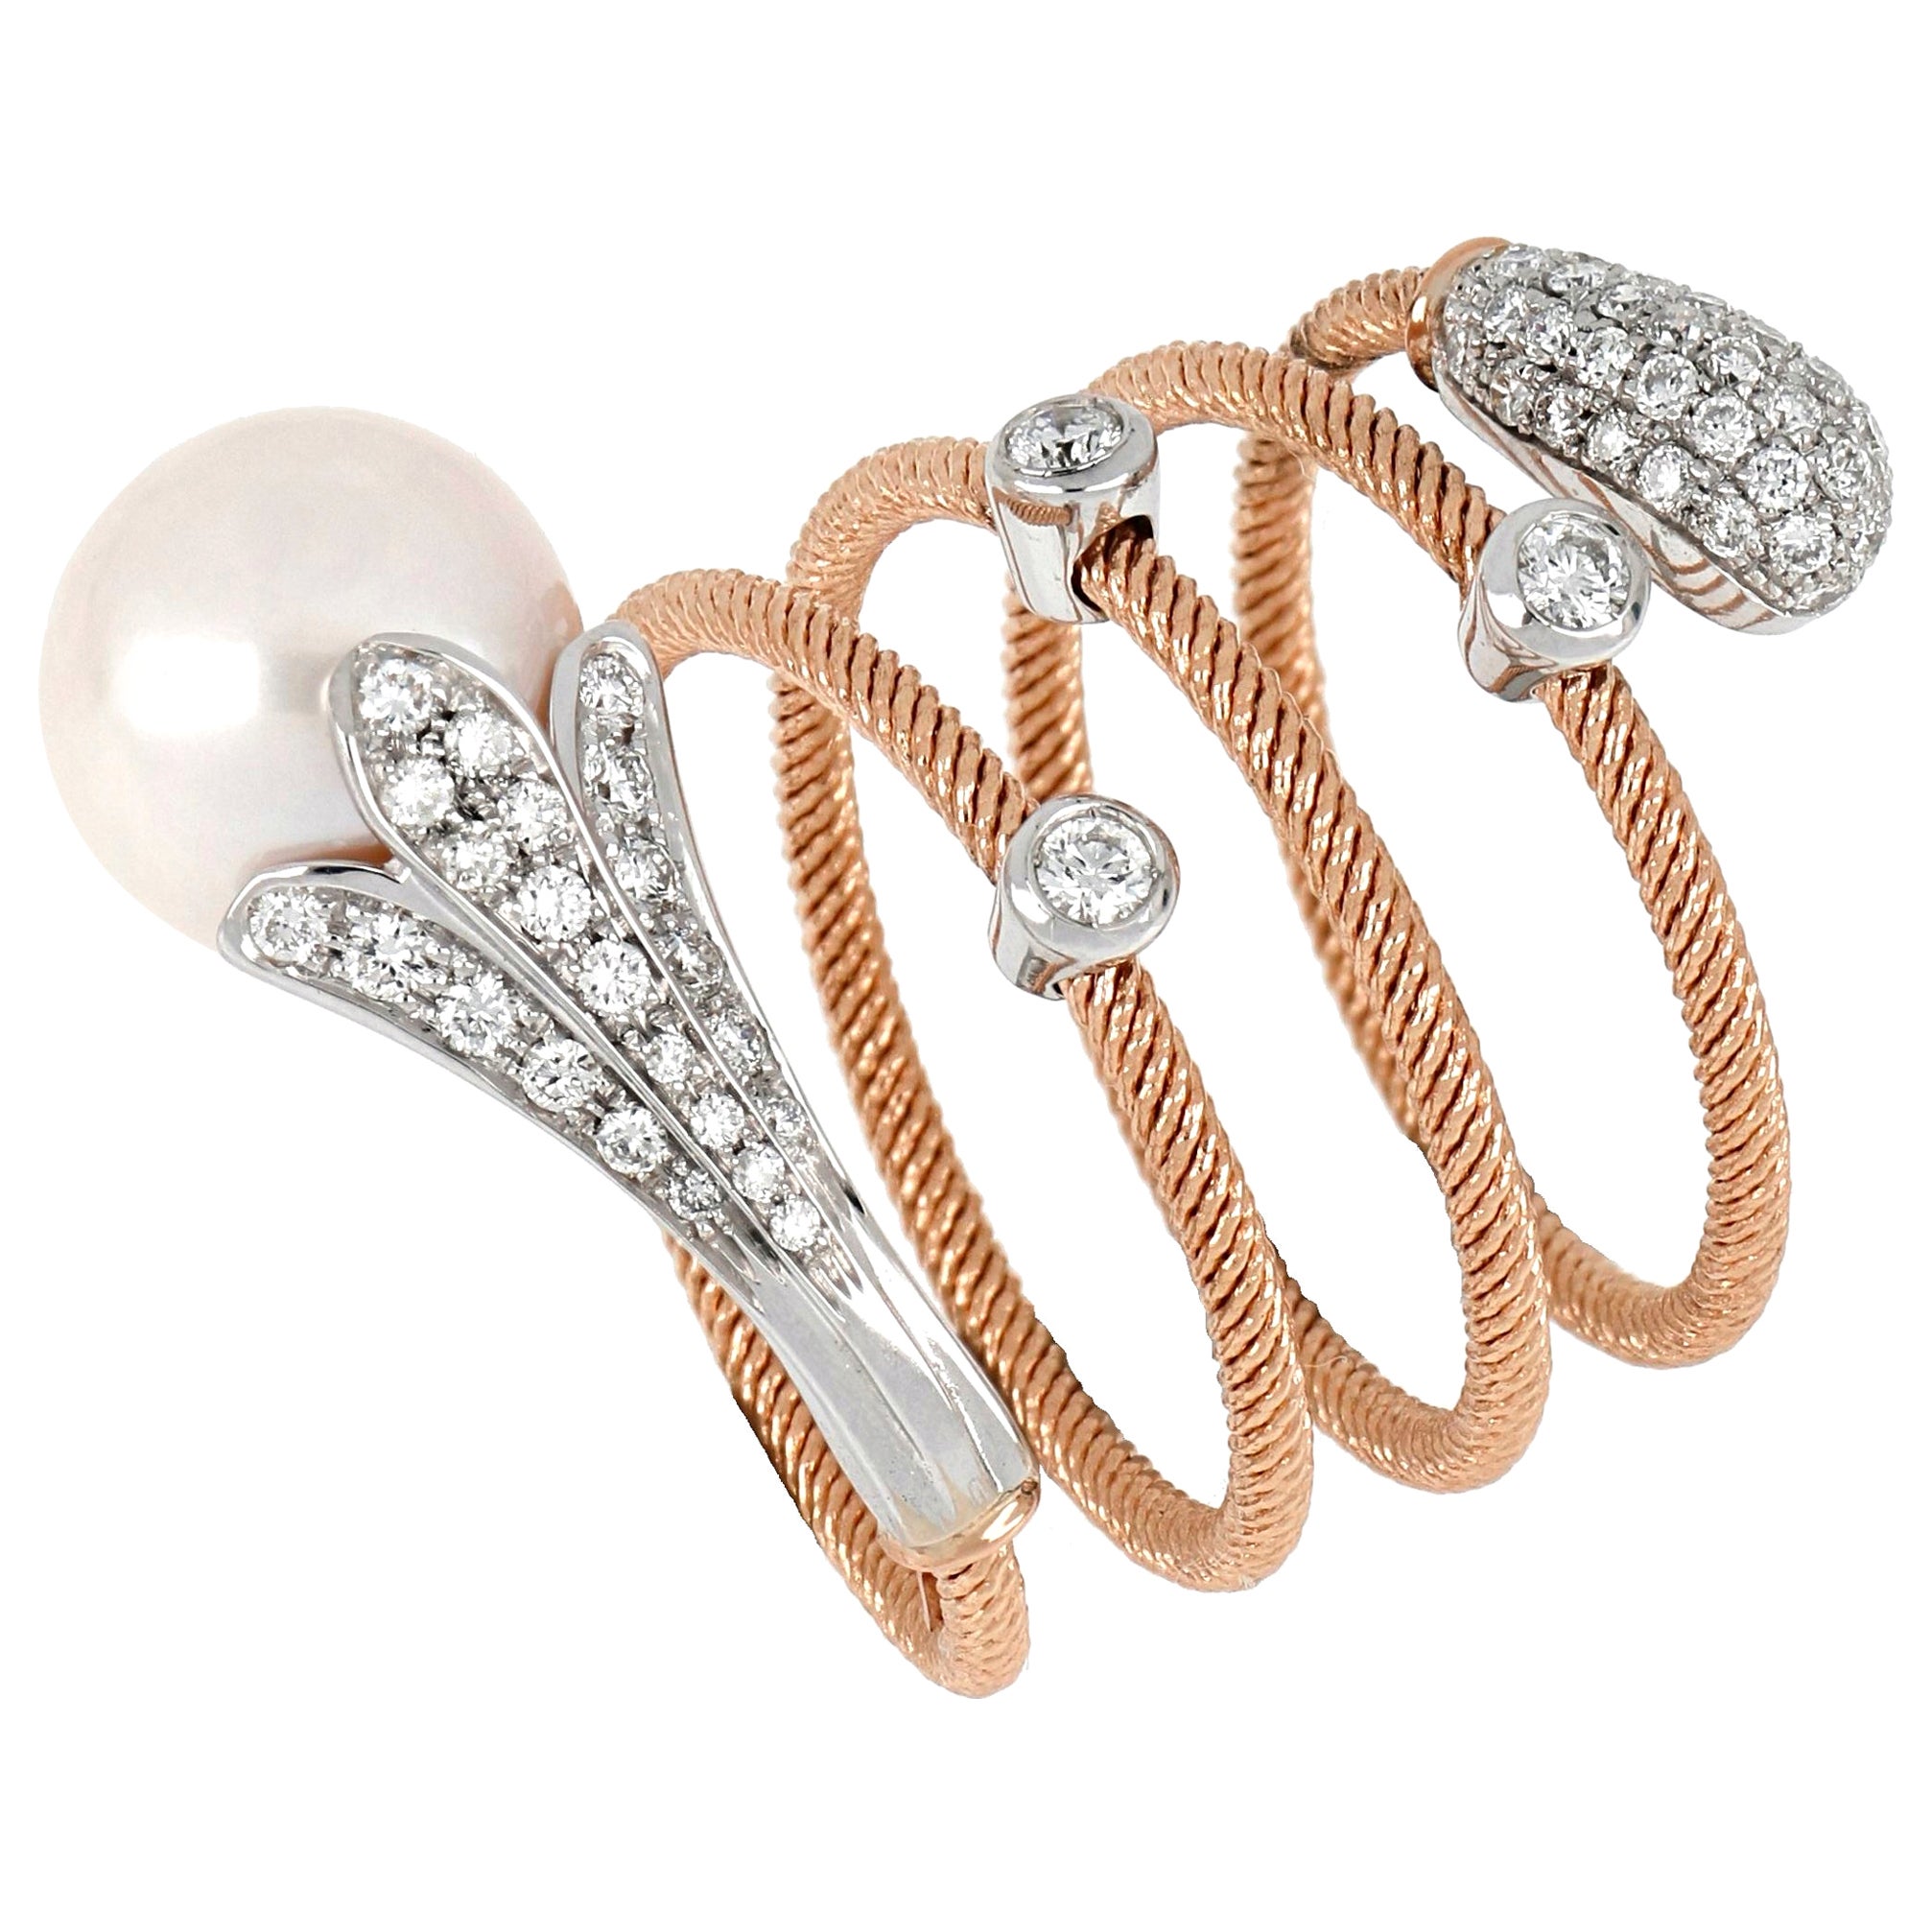 18kt Rose and White Gold Flex Ring with Pearl and Diamonds